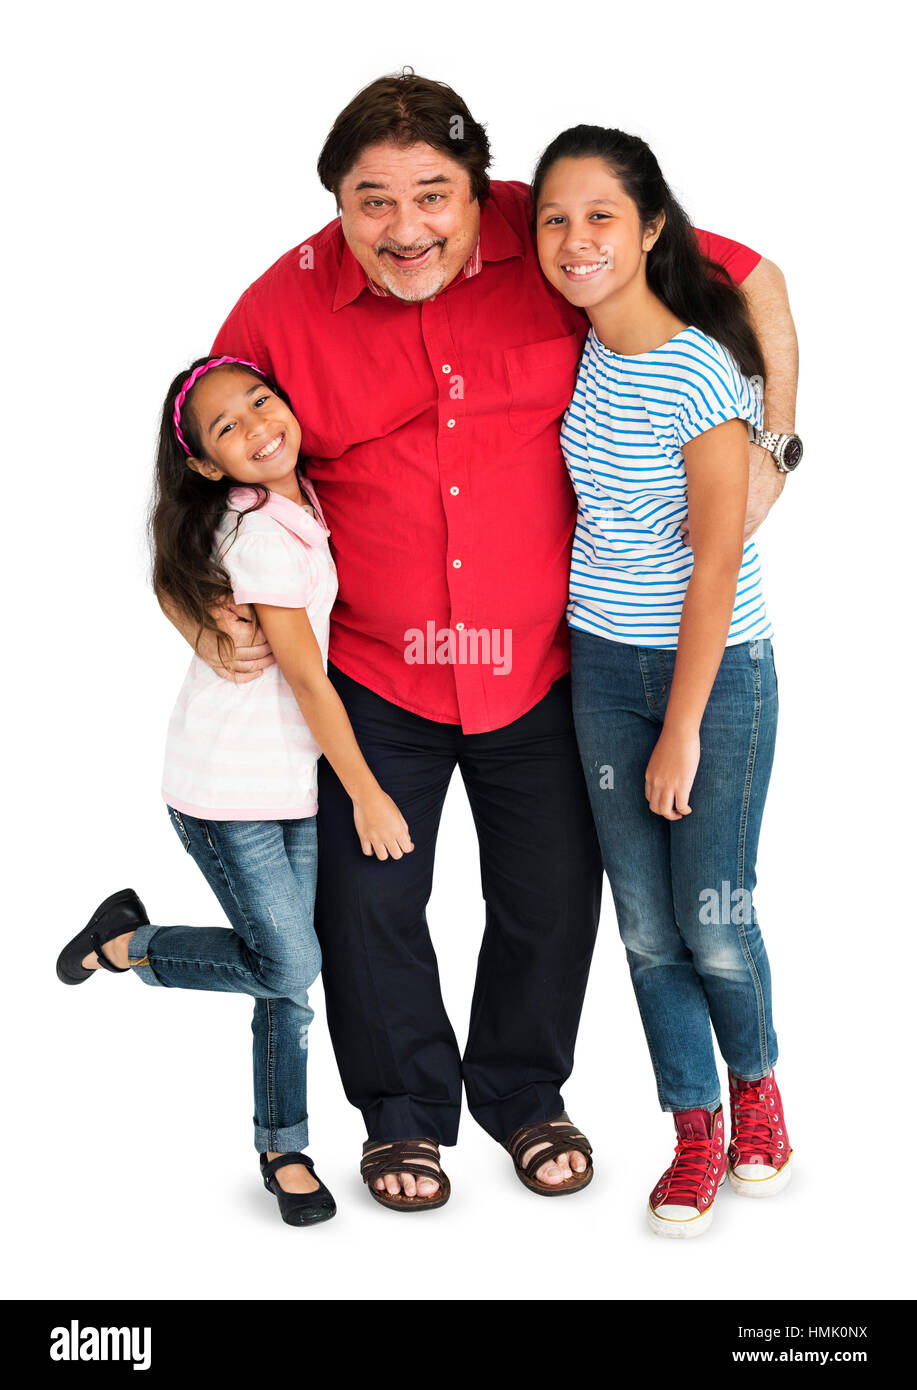 Father Daughter Child Togetherness Support Concept Stock Photo